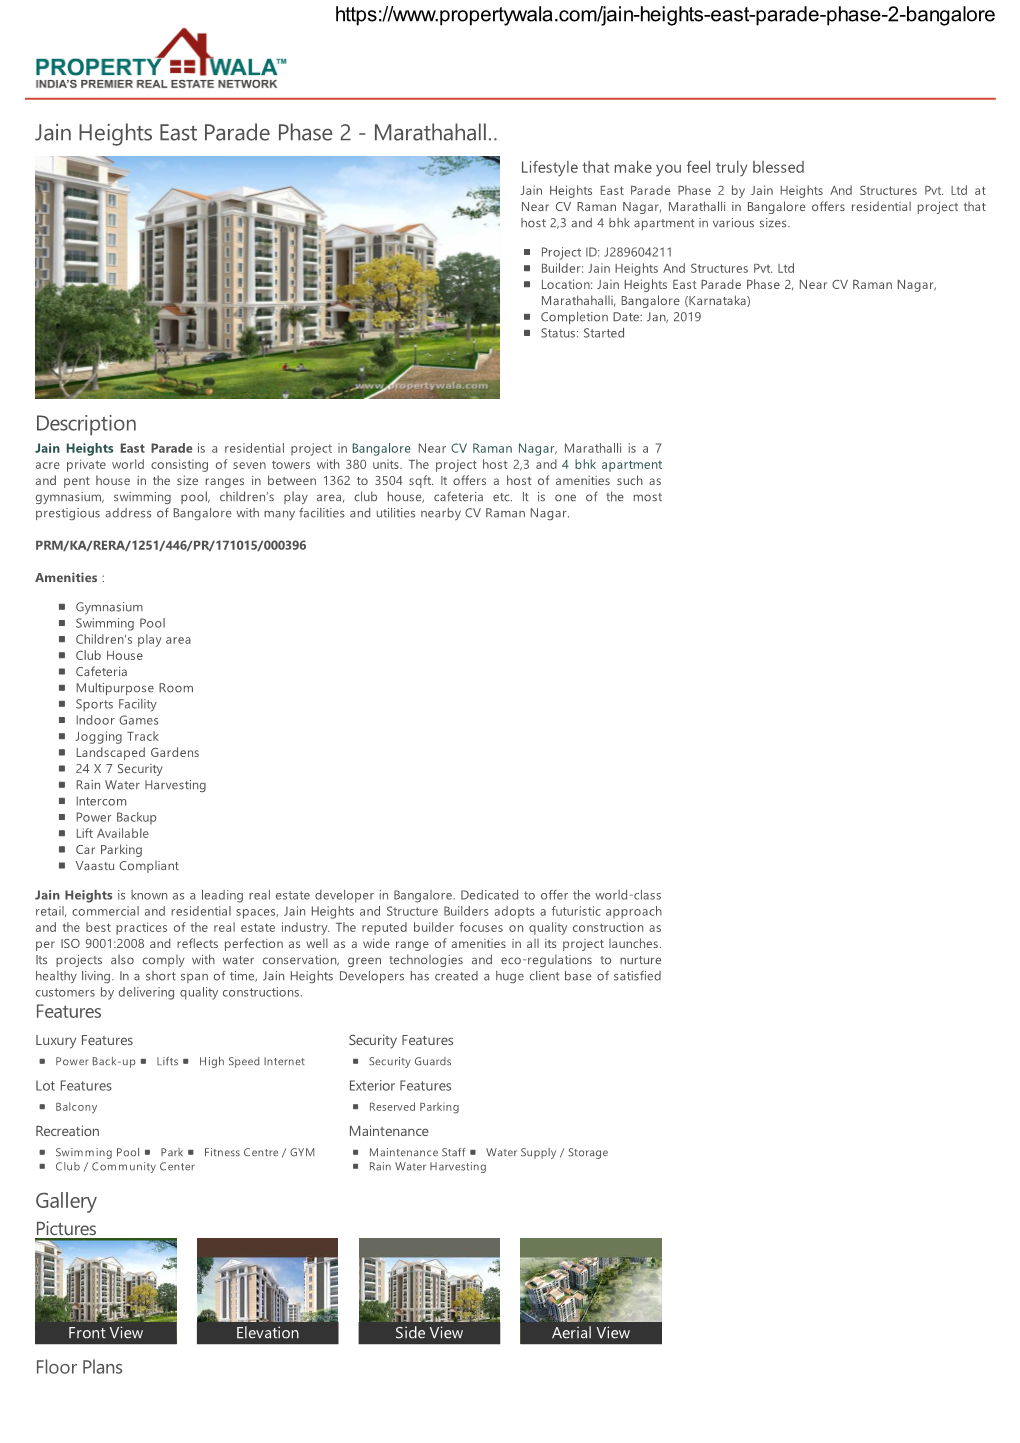 Jain Heights East Parade Phase 2 - Marathahall… Lifestyle That Make You Feel Truly Blessed Jain Heights East Parade Phase 2 by Jain Heights and Structures Pvt